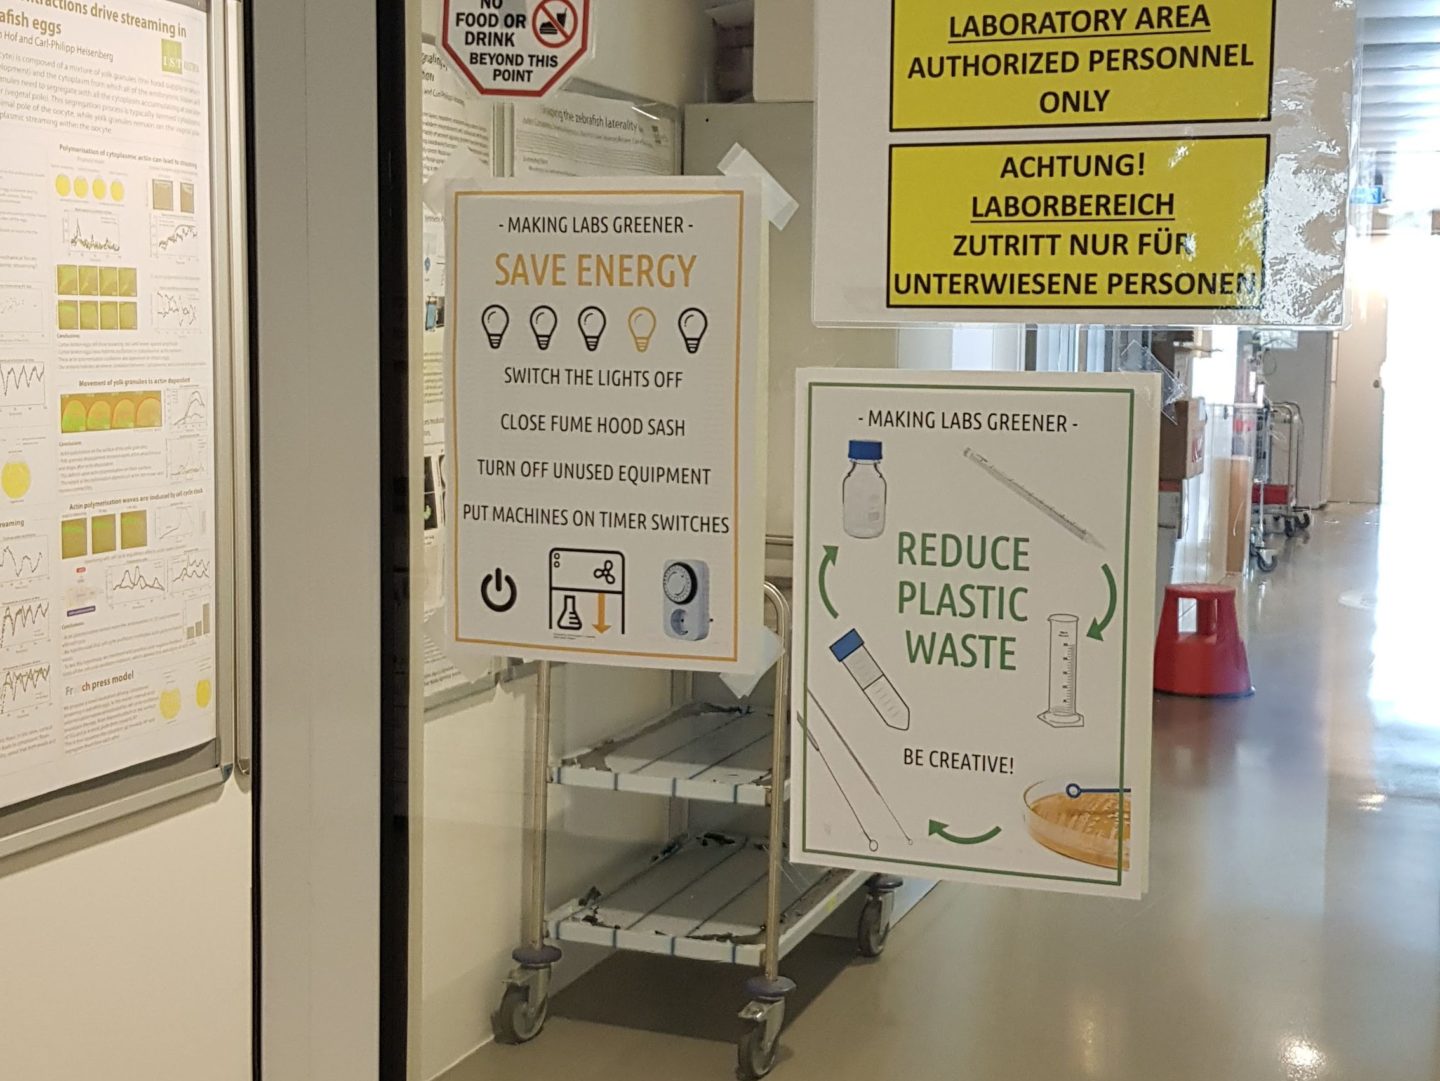 Greener Labs IST Austria laboratory with information signs